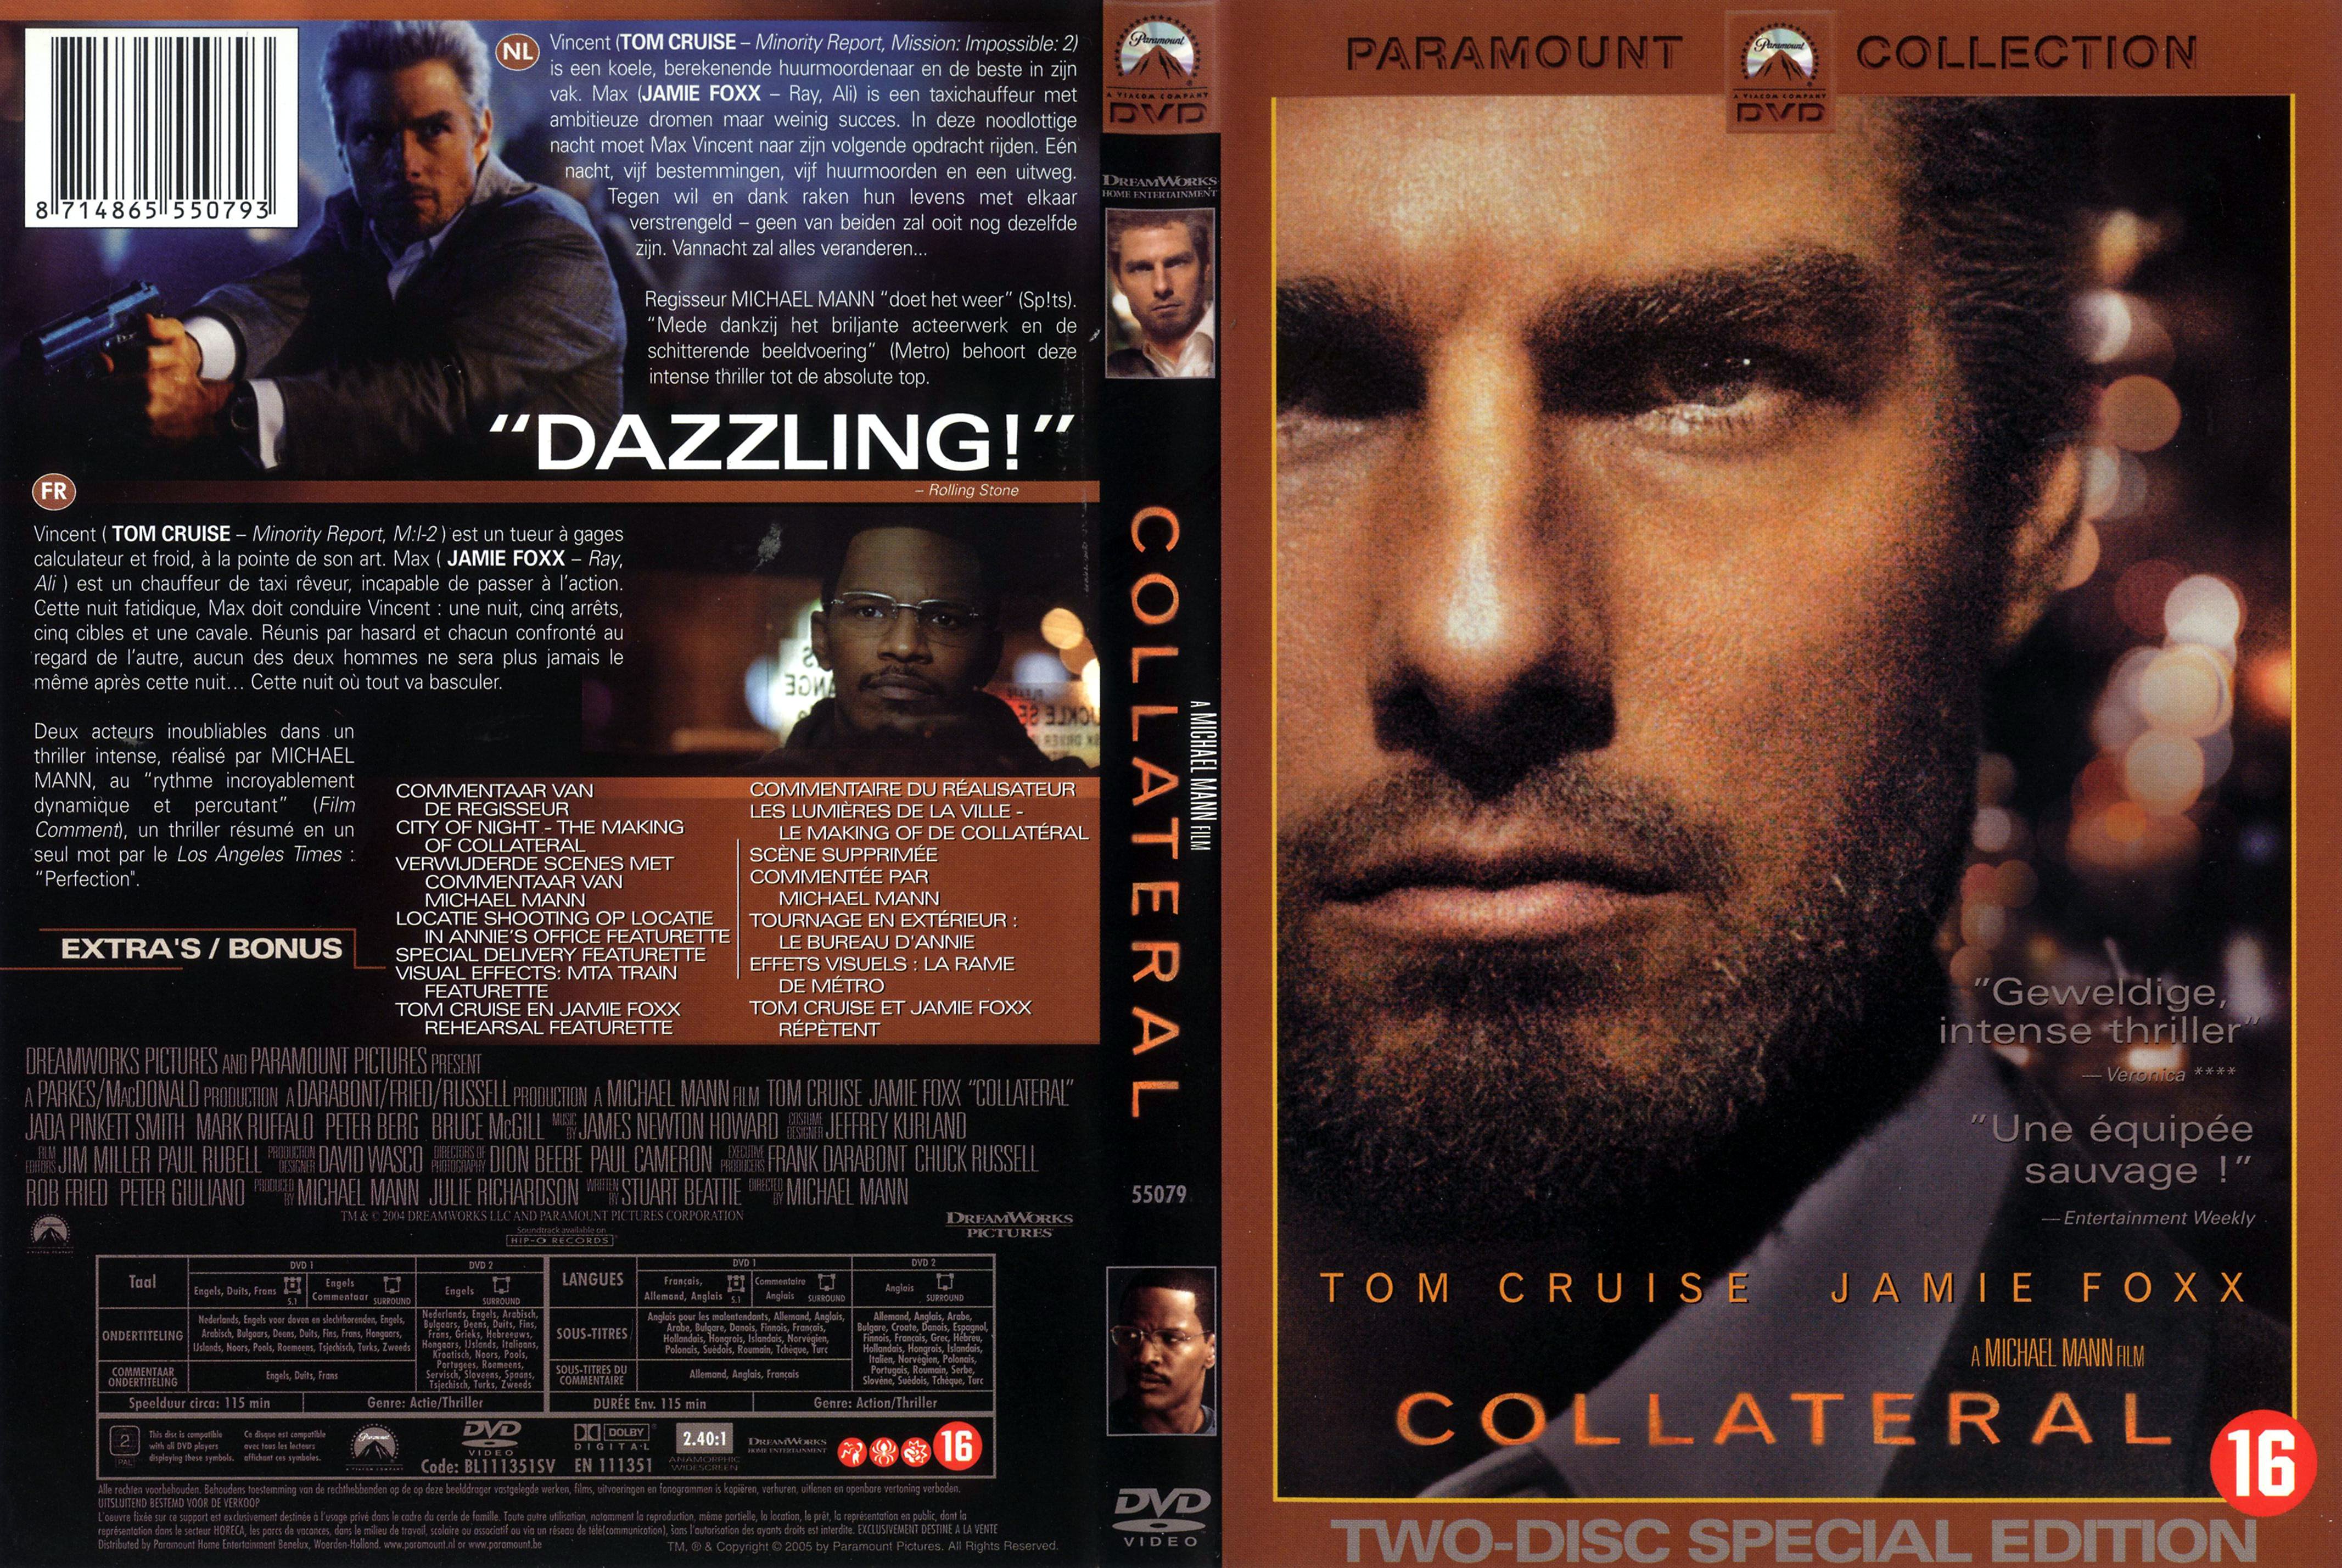 Jaquette DVD Collateral v3